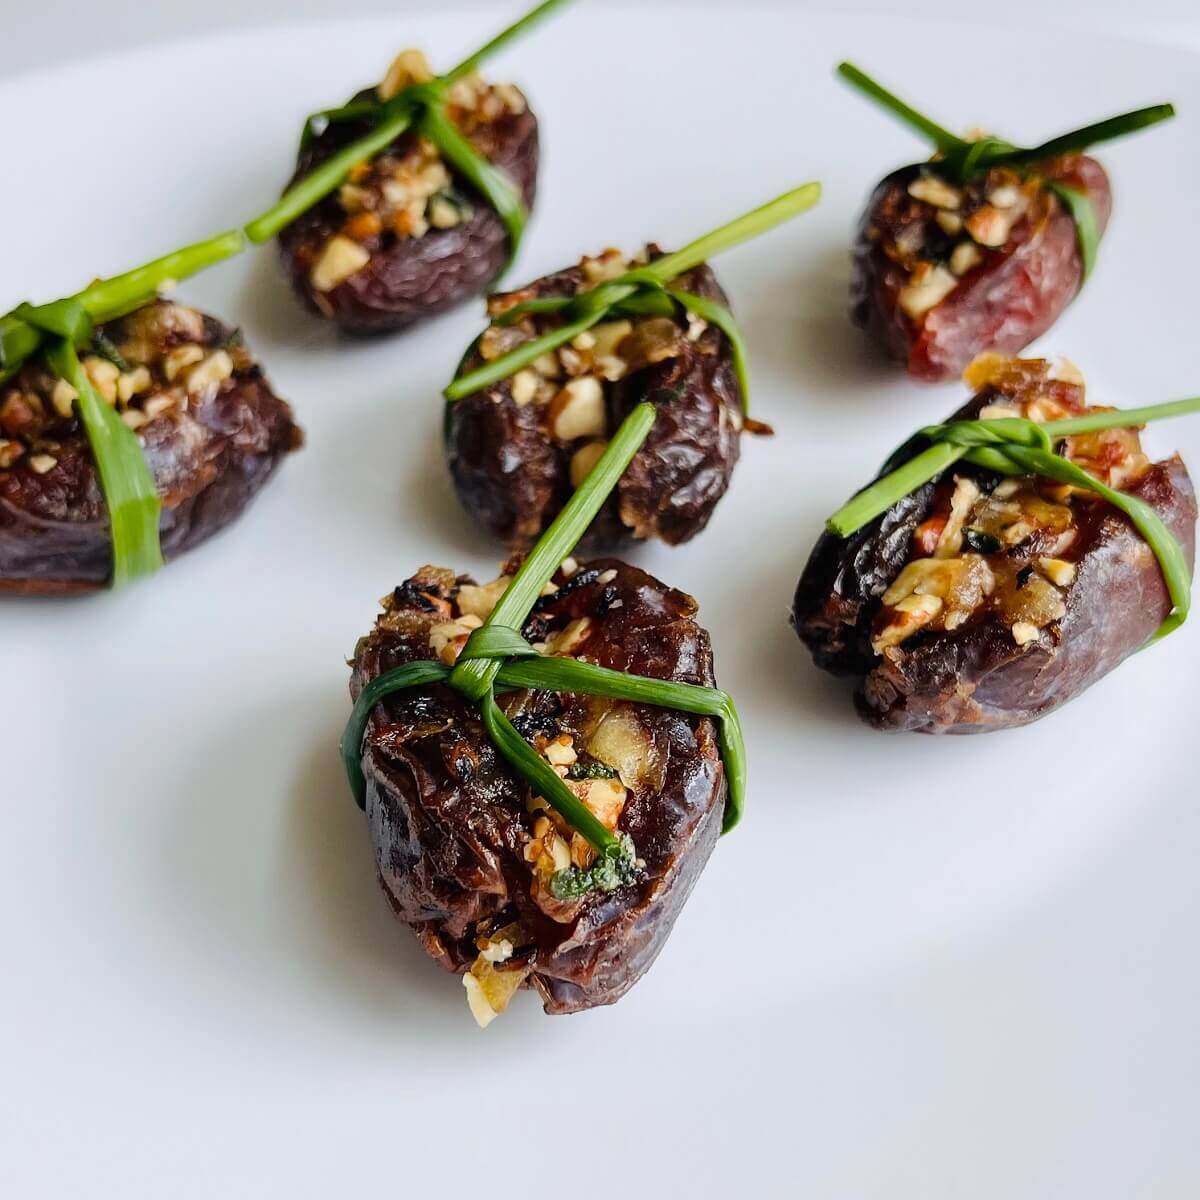 Date appetizers tied with a fresh chive.